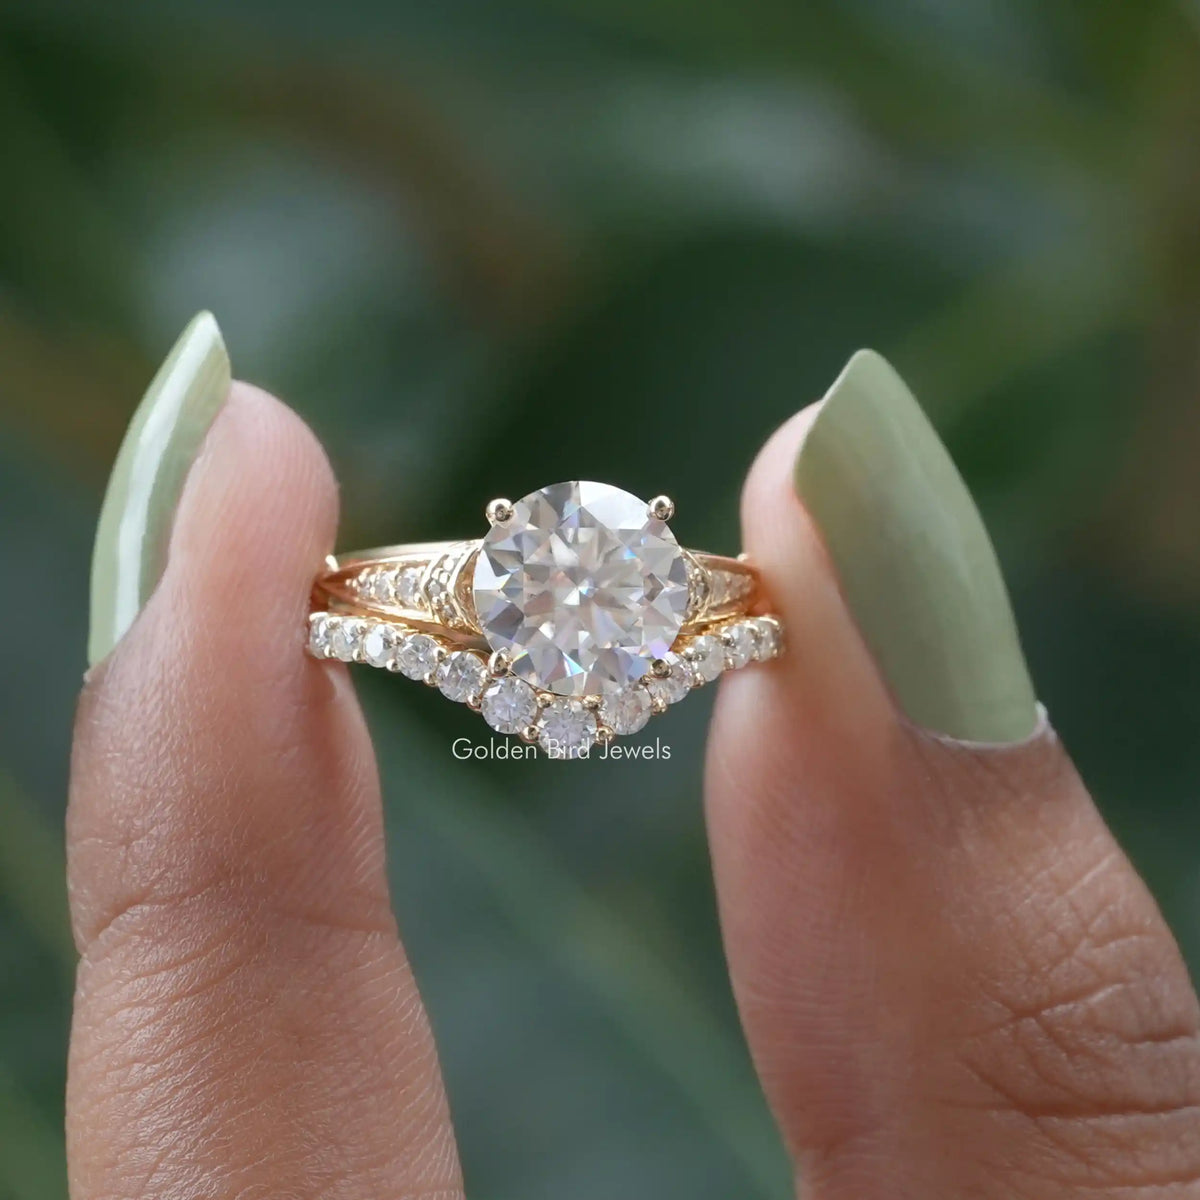 [Front view of round cut accent stone engagement ring made of wedding band]-[Golden Bird Jewels]